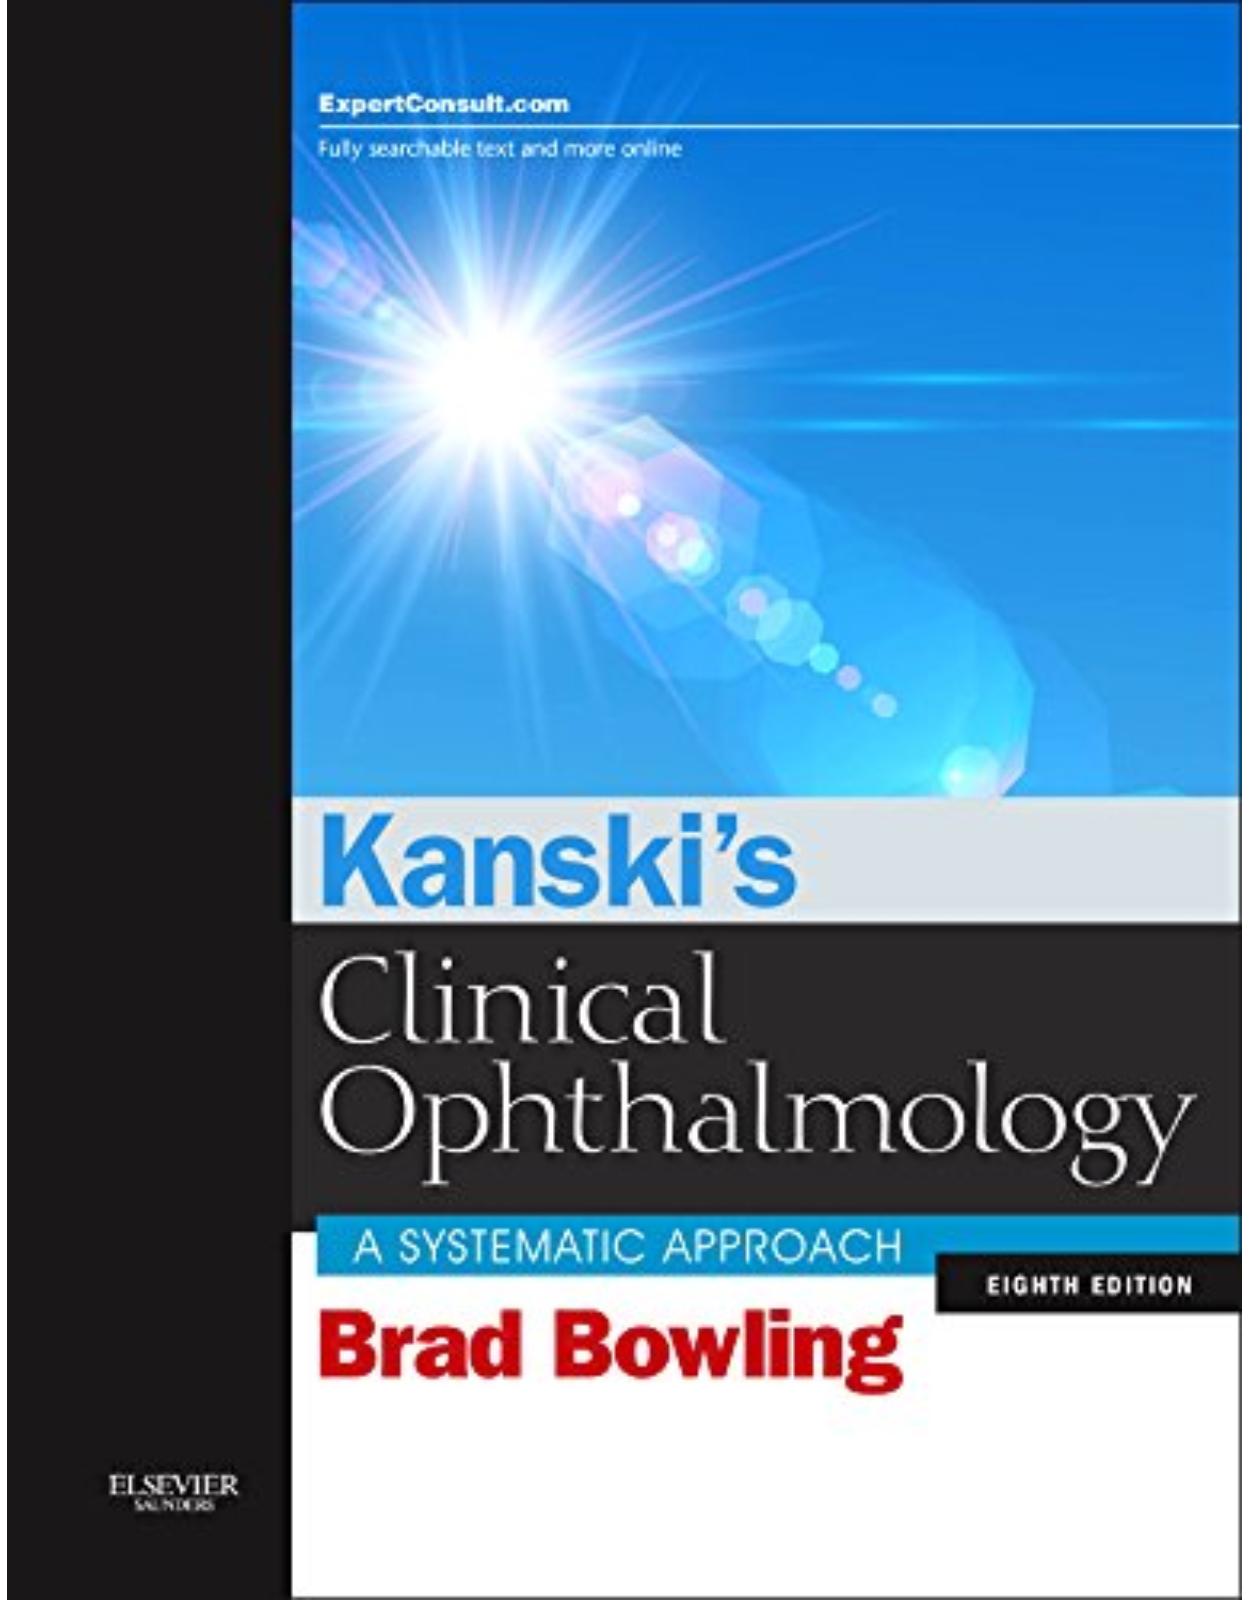 Kanski's Clinical Ophthalmology: A Systematic Approach, 8e